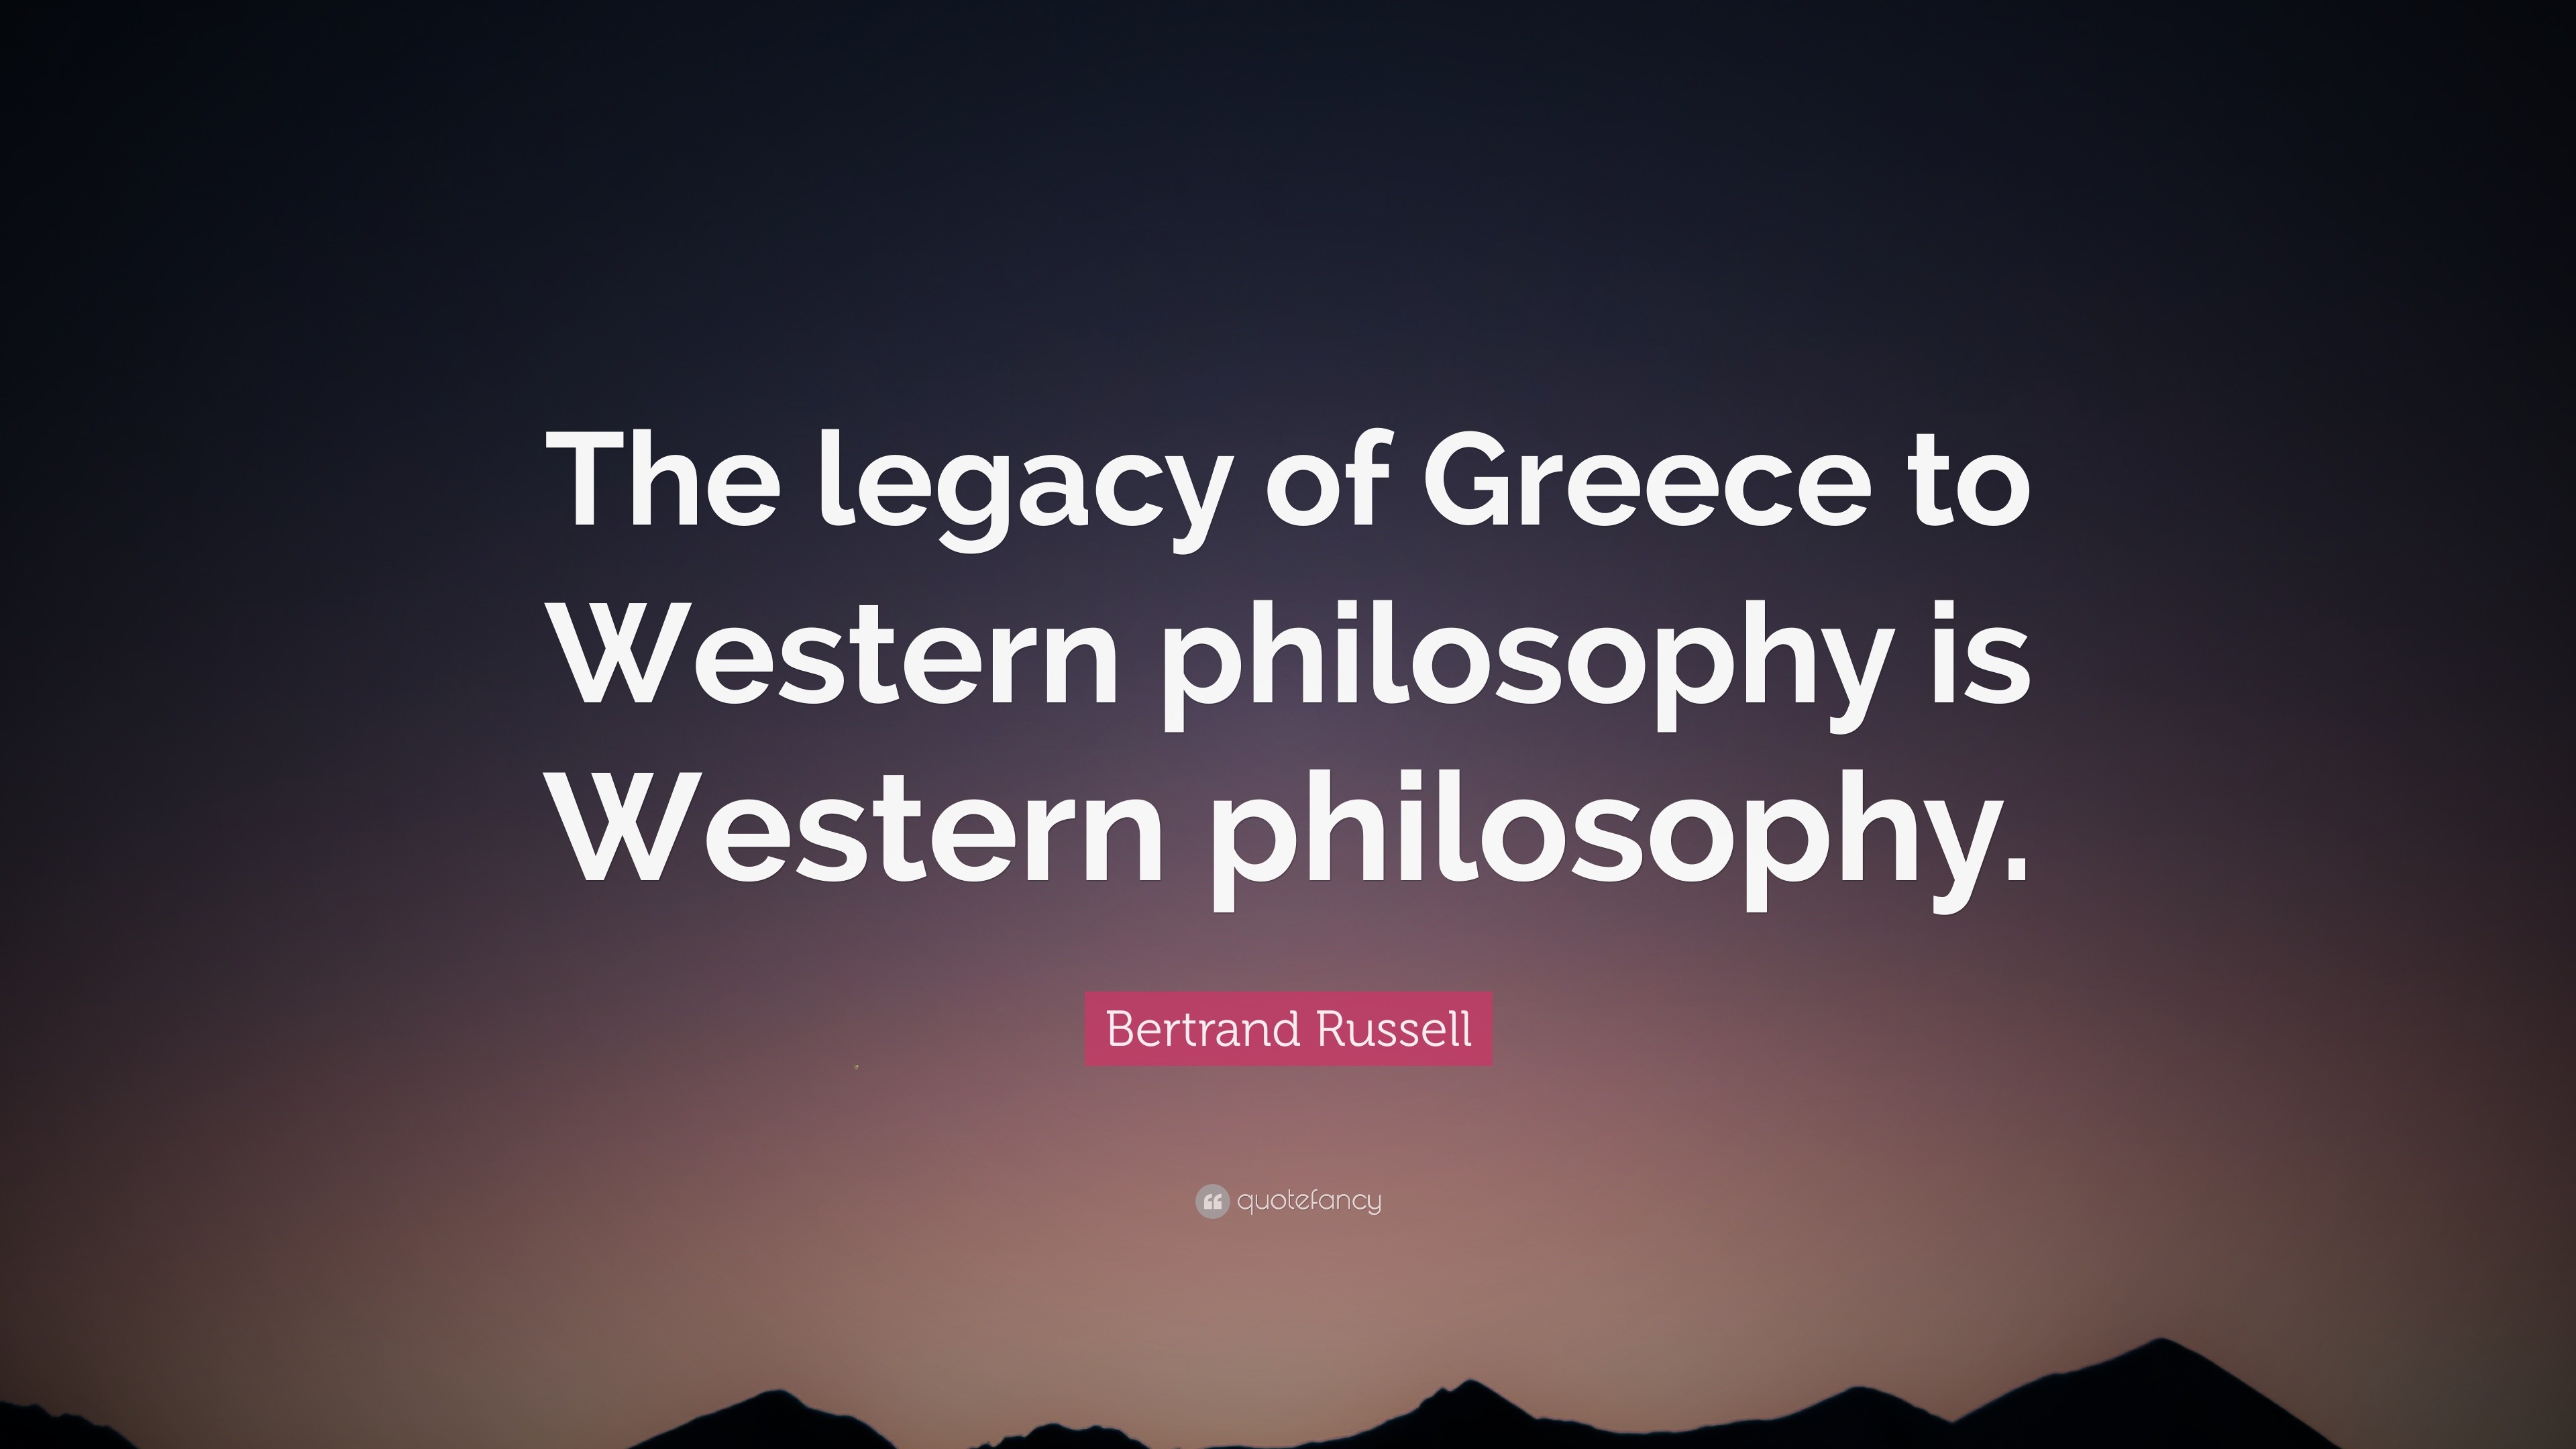 a history of western philosophy by bertrand russell